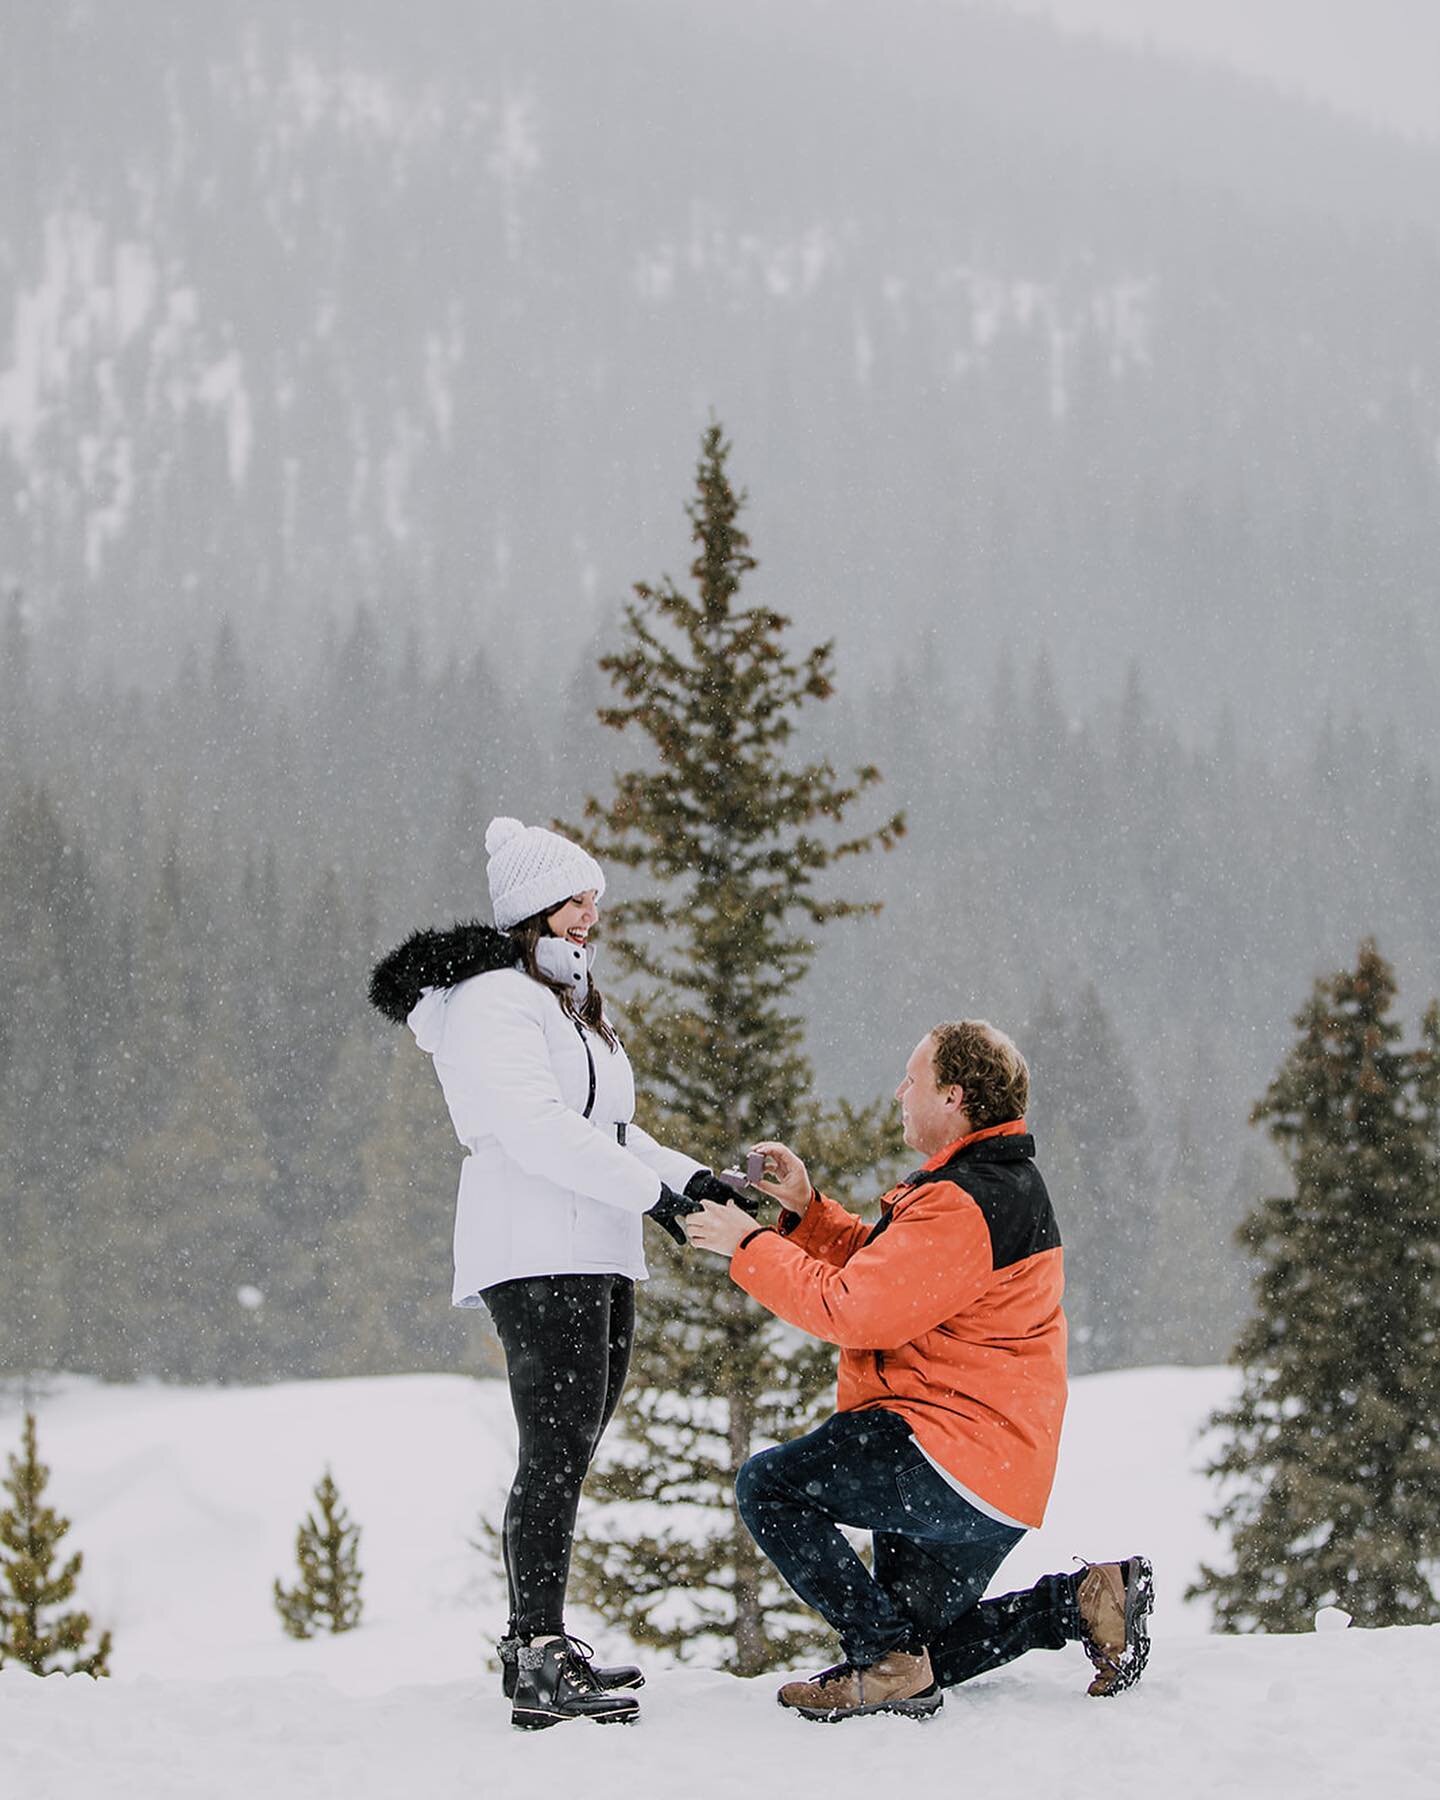 Photographed the sweetest sleigh ride proposal while the snow fell quietly around them. She said yes and these two are off to begin making wedding plans! Thank you @goldenhorseshoesleighrides for pulling off such a fun and perfect surprise!
.
.
. 
@g